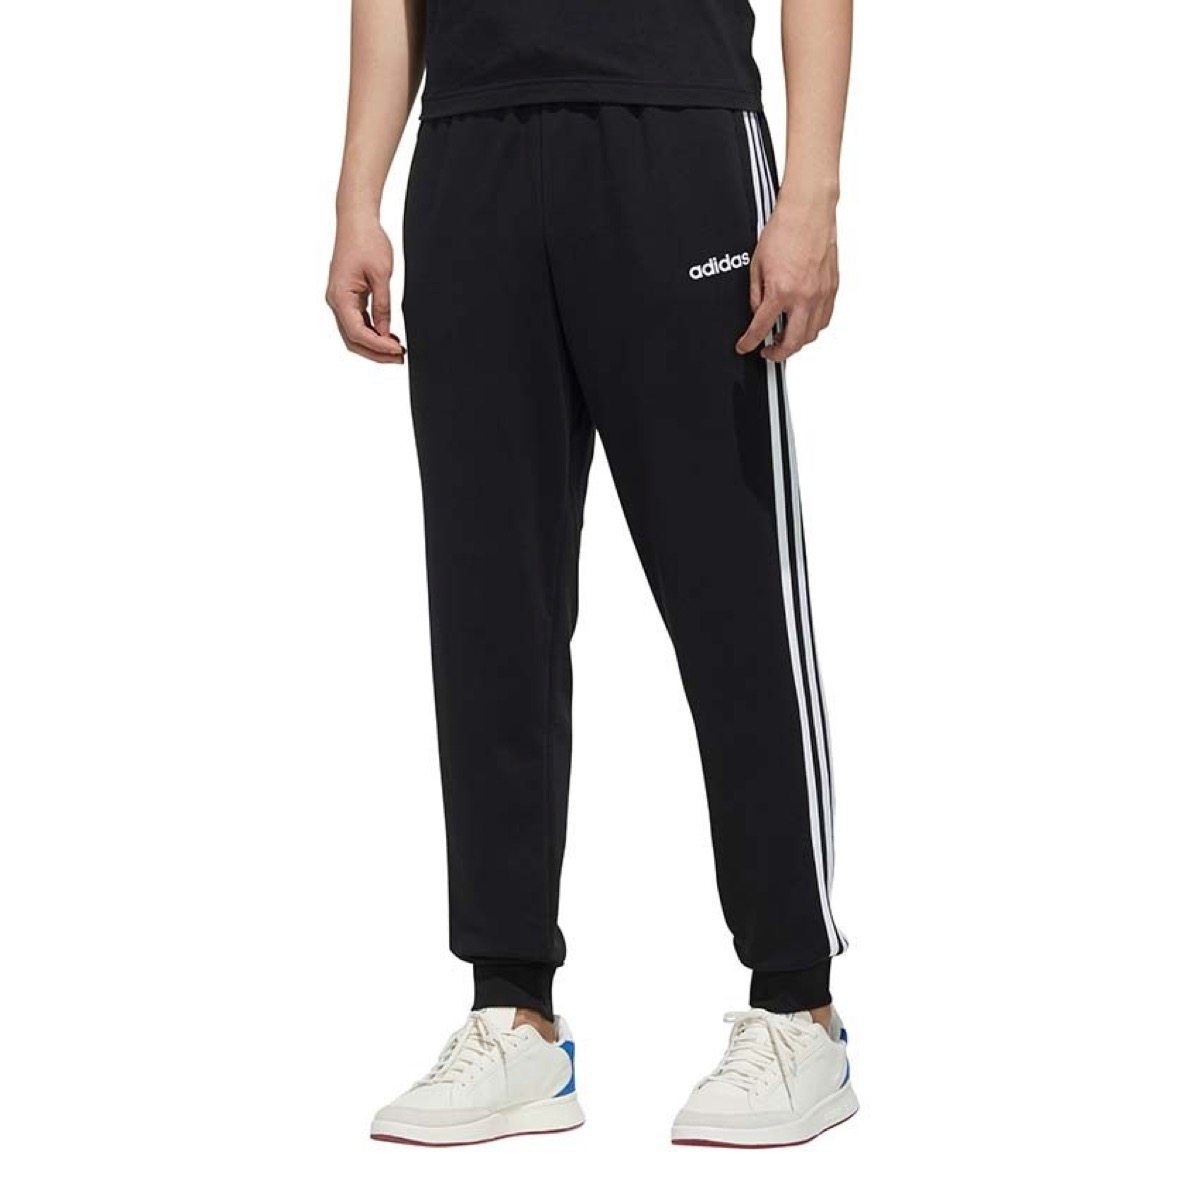 Man wearing tapered athletic pants